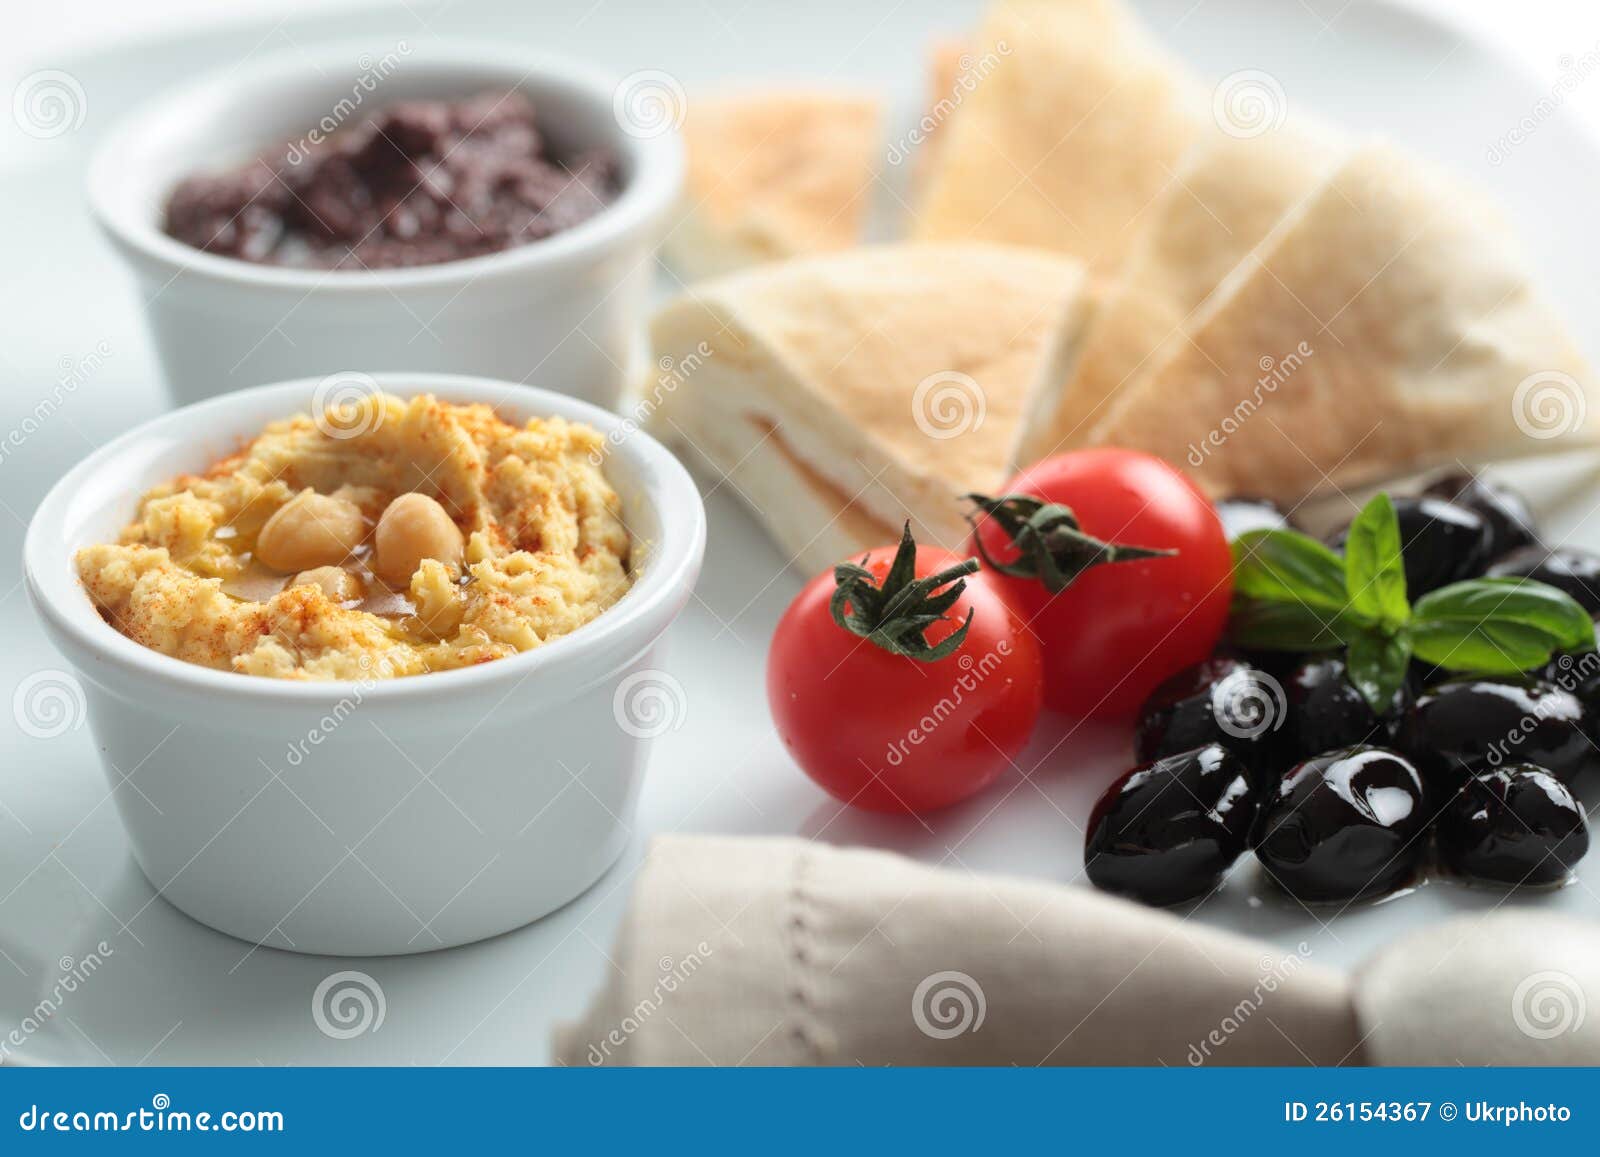 meze with tomato, olives, and pita bread